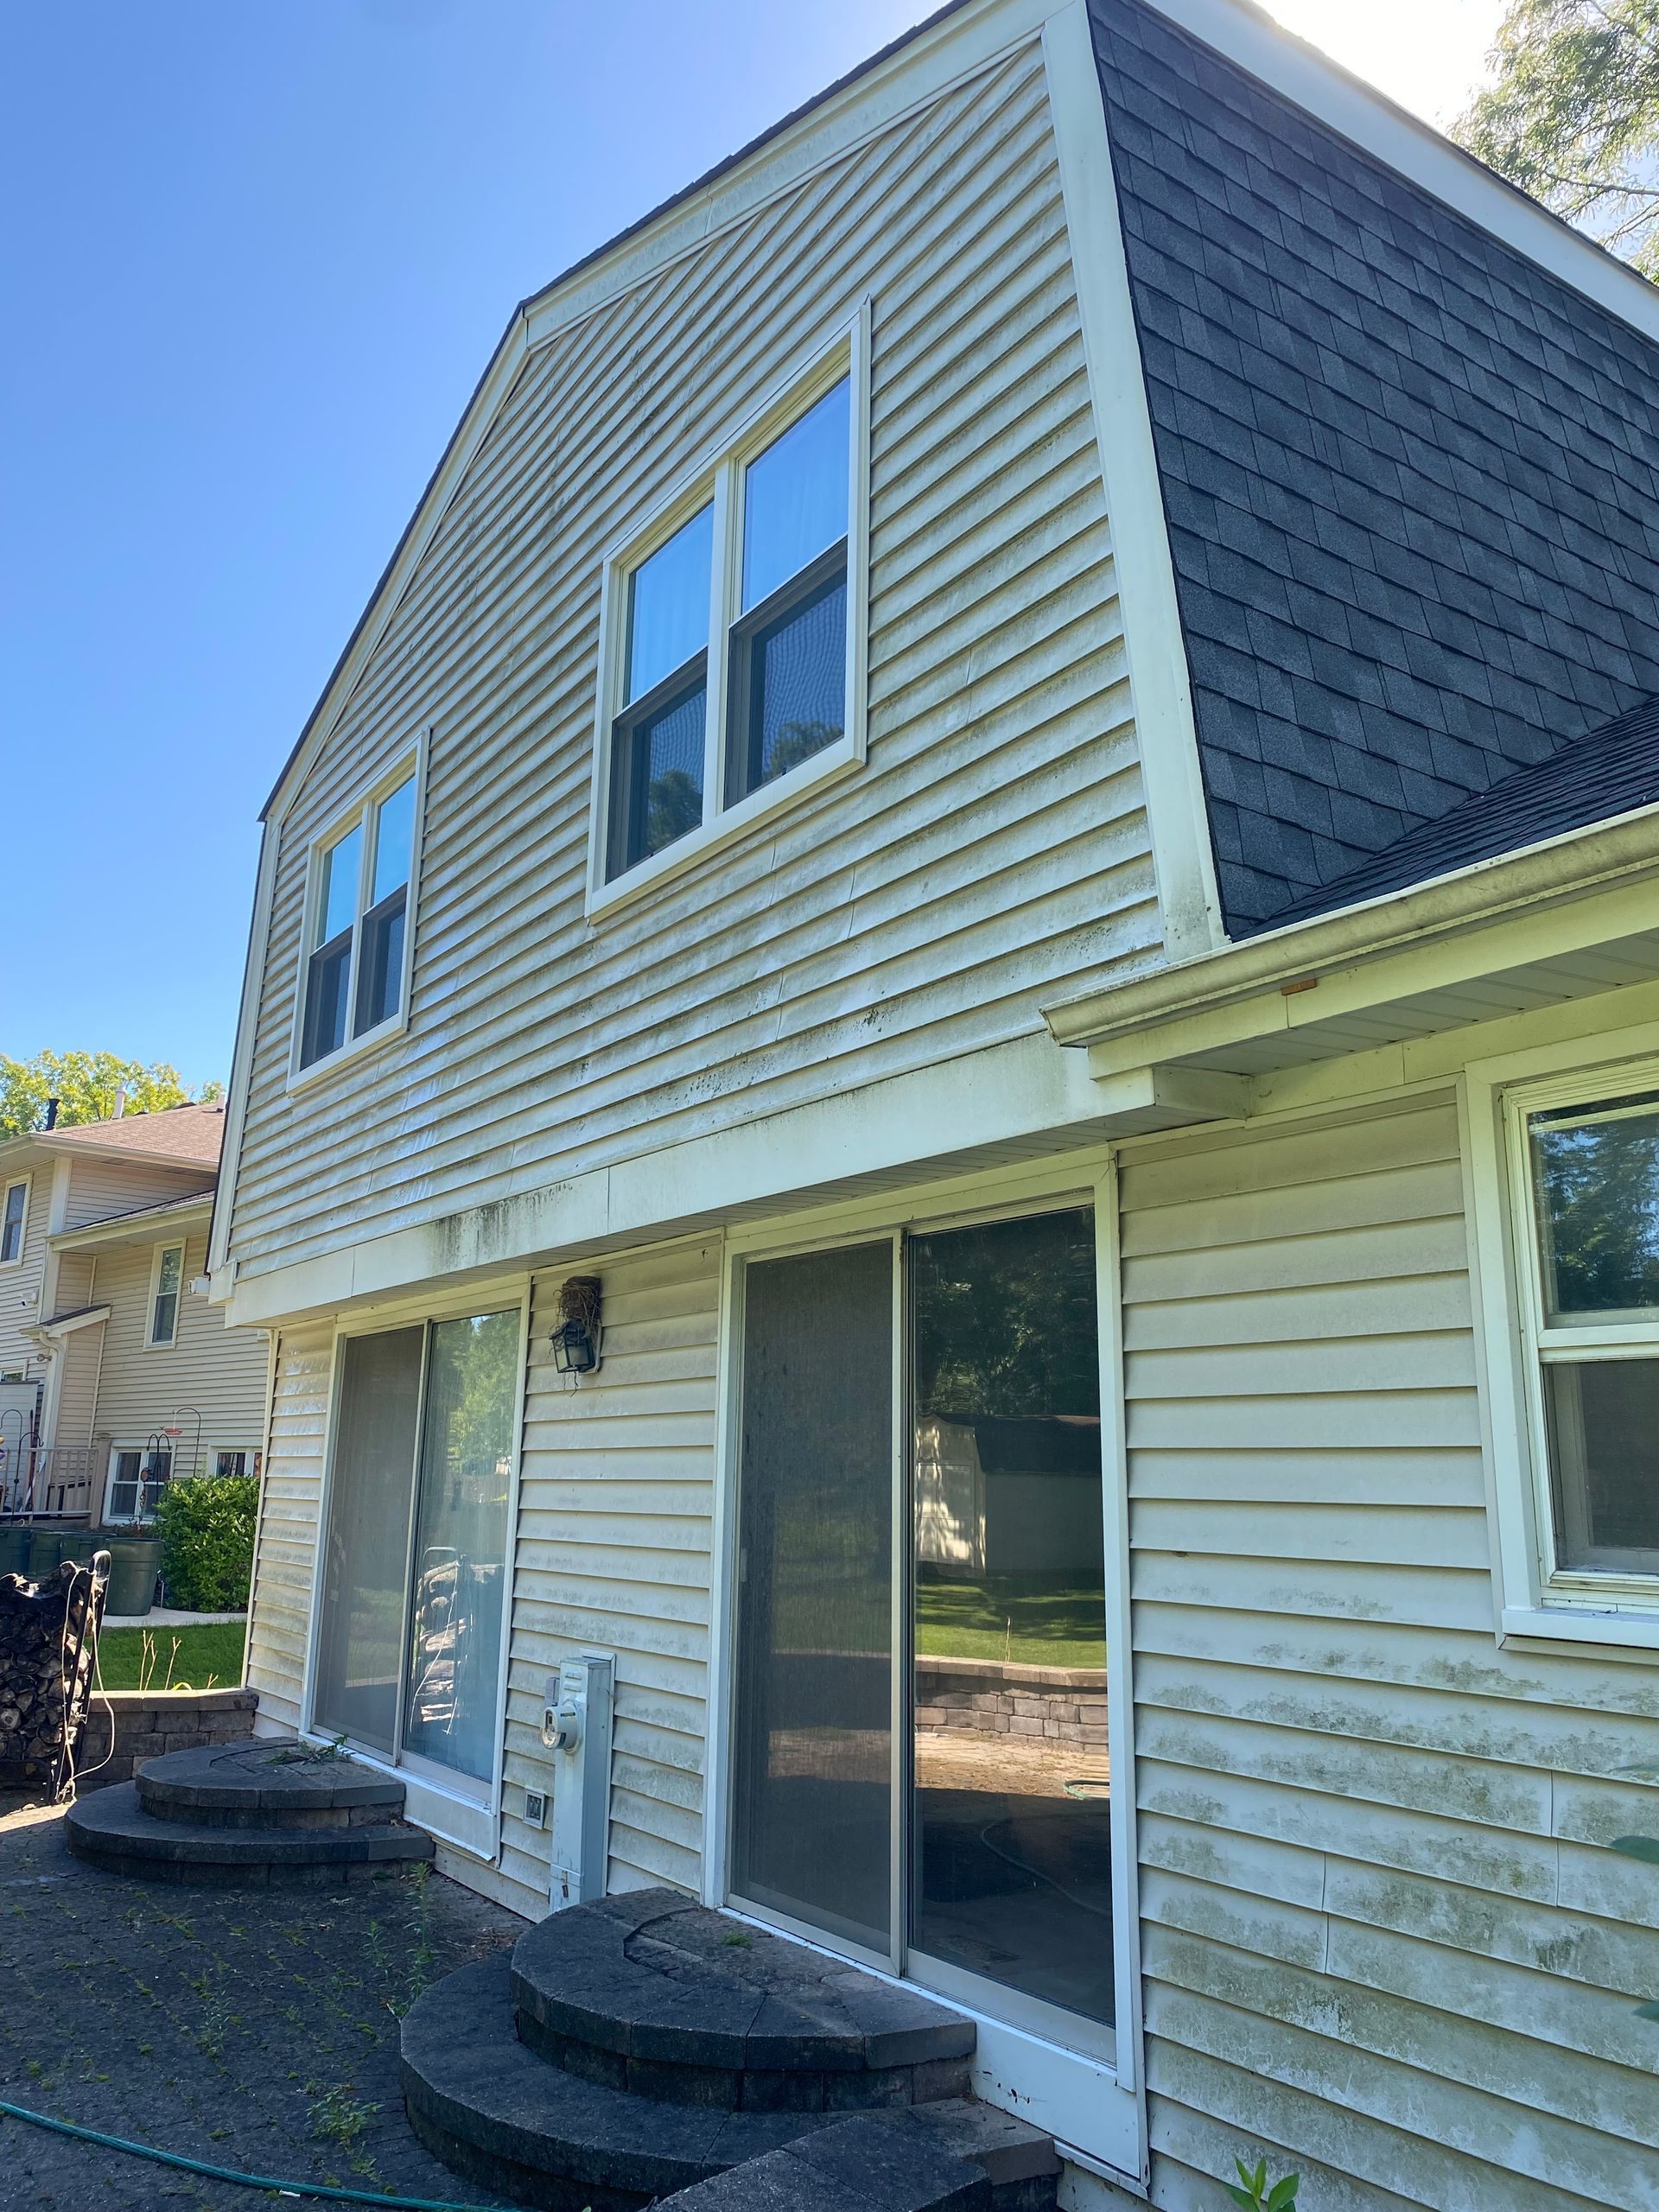 Dirty New Siding - Lake Zurich, IL - Peter’s Power Wash Services